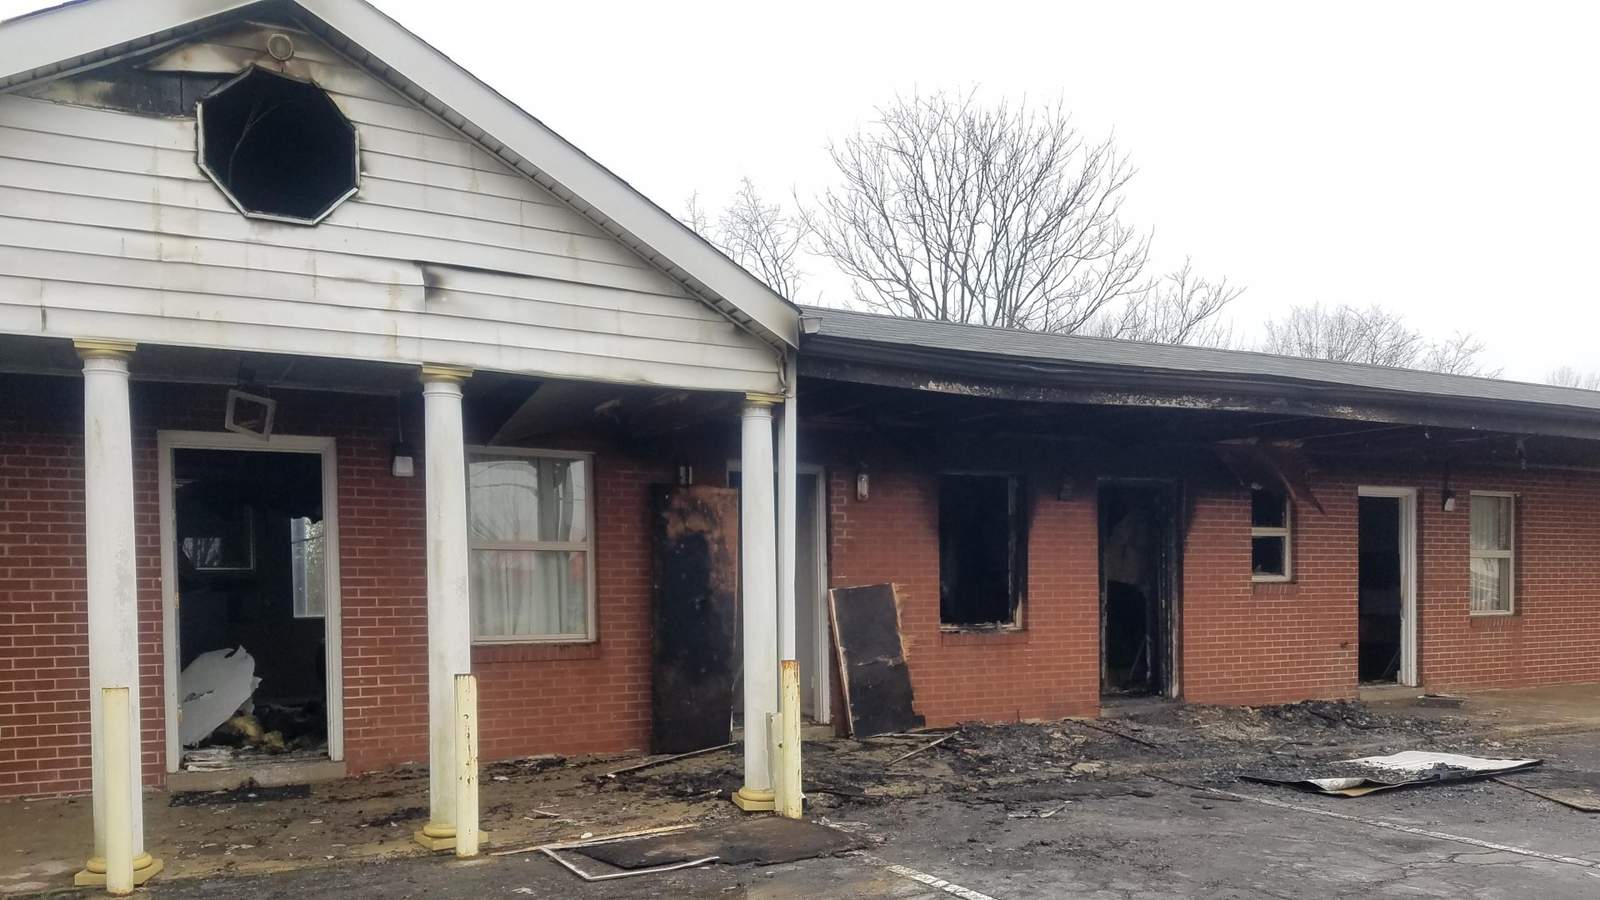 No serious injuries reported after motel fire in Danville